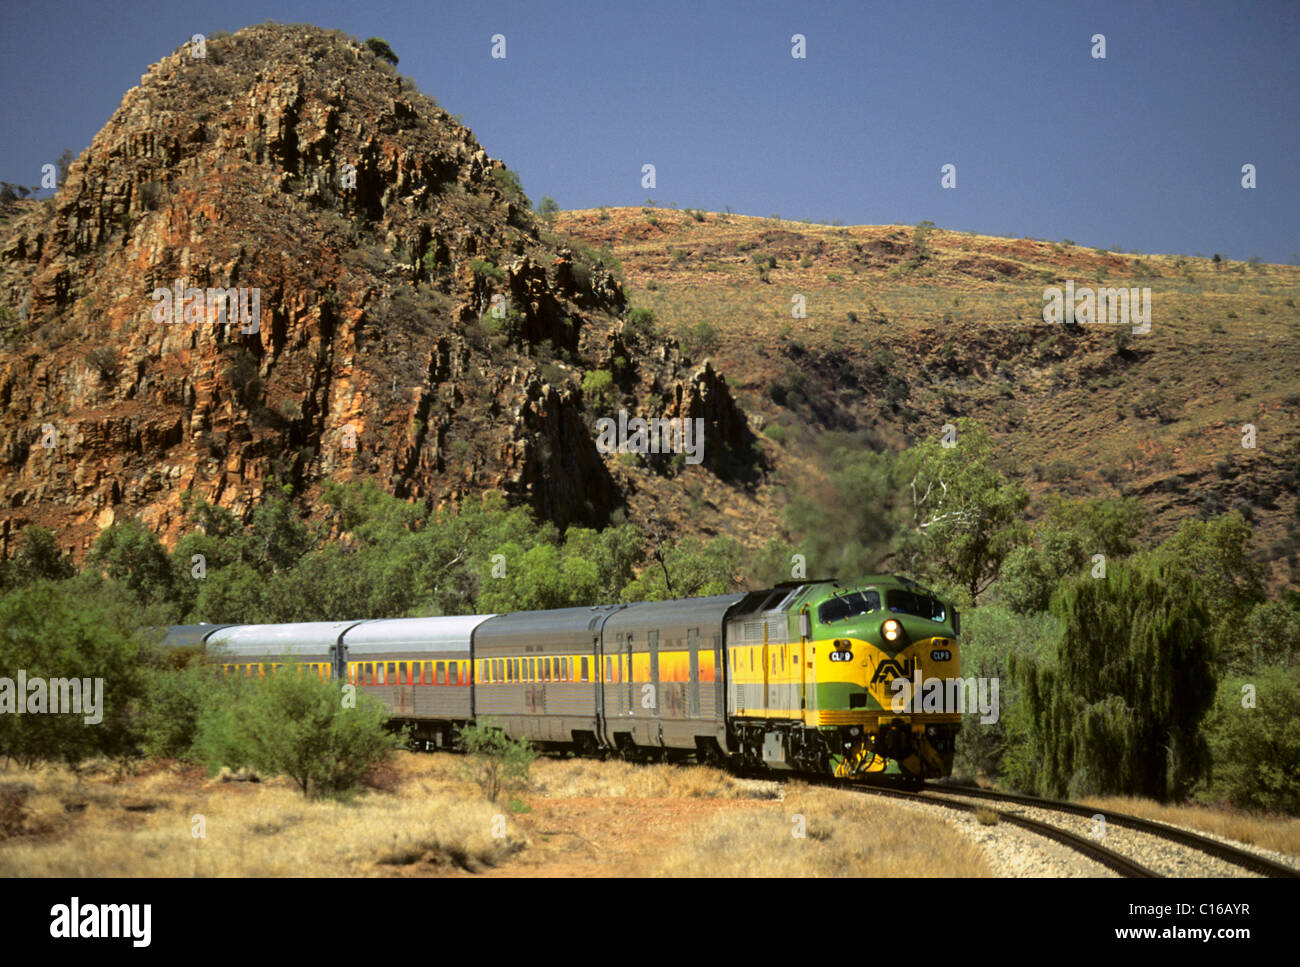 Train of the railway line 'The Ghan' near Alice Springs, Red Centre, Northern Territory, Australia Stock Photo